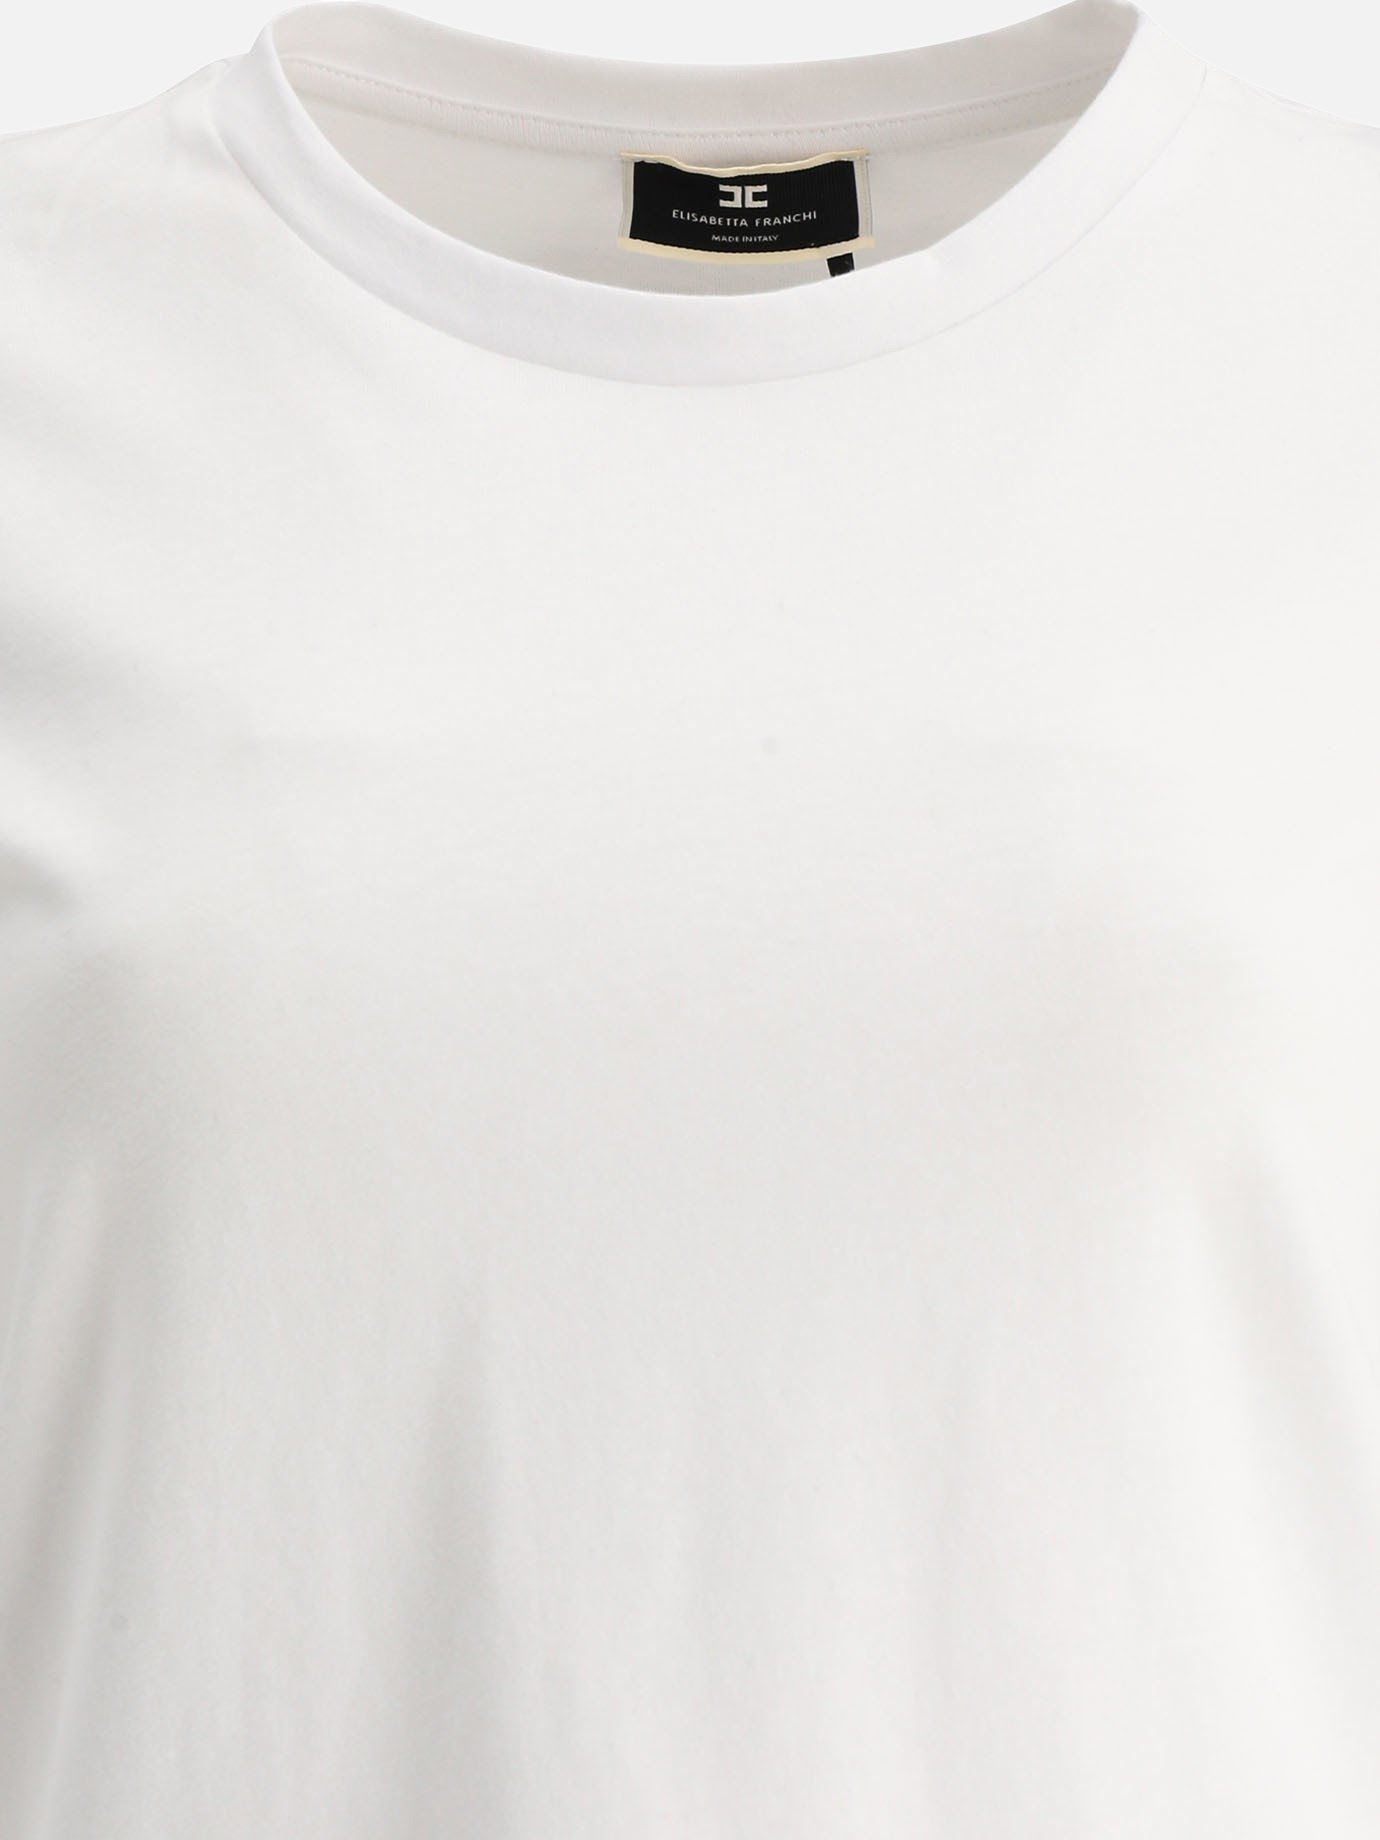 T-shirt with embroidery by Elisabetta Franchi